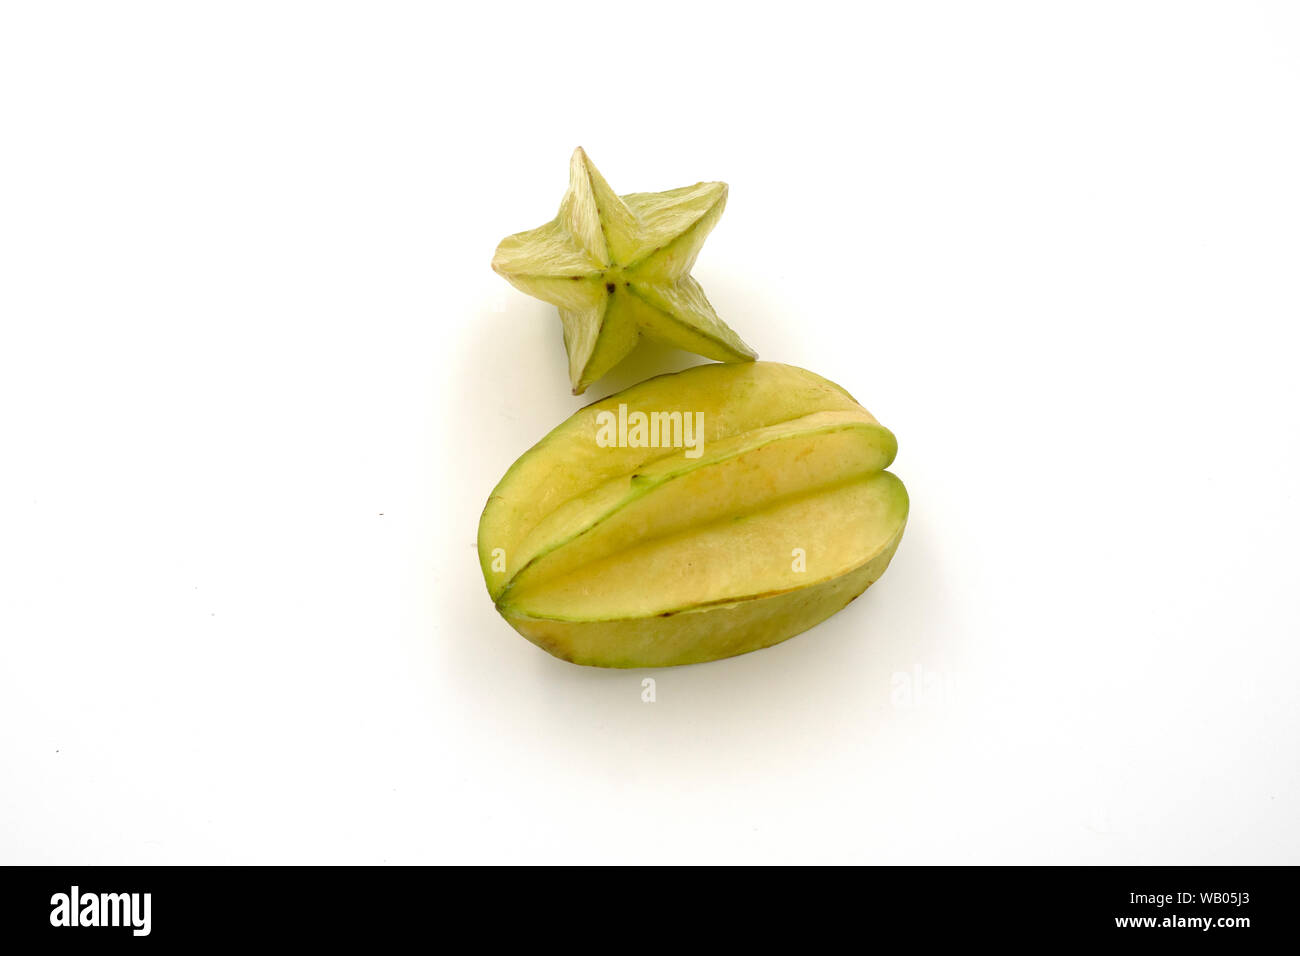 Fresh star fruits isolated on white background. Healthy green fruits. Tropical fruit. Stock Photo